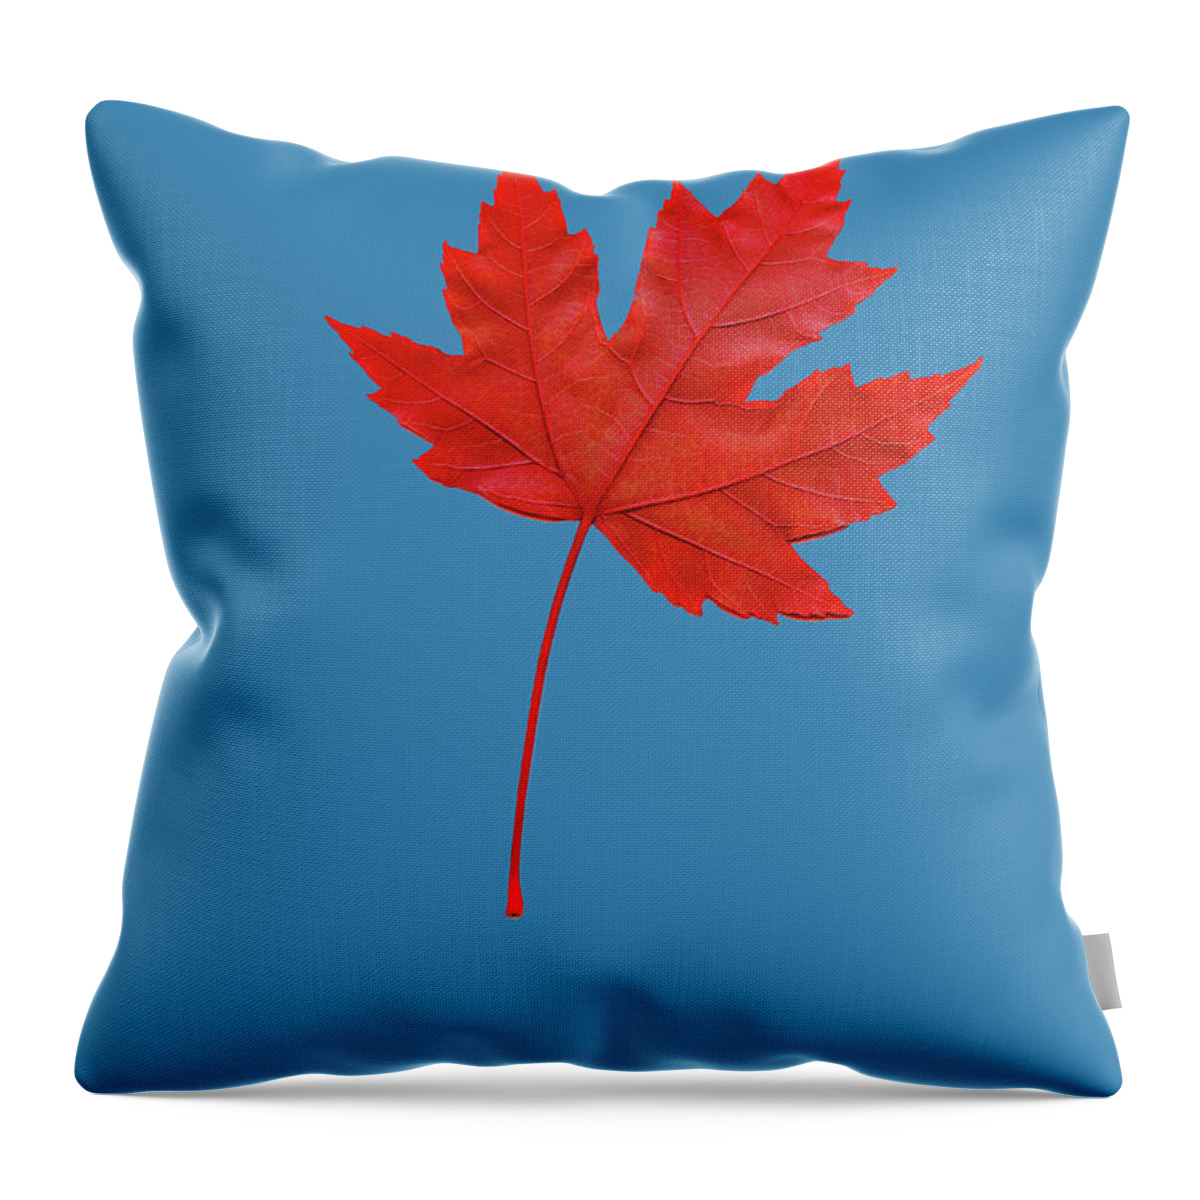 Single Object Throw Pillow featuring the photograph Red Maple Leaf by Russell Illig